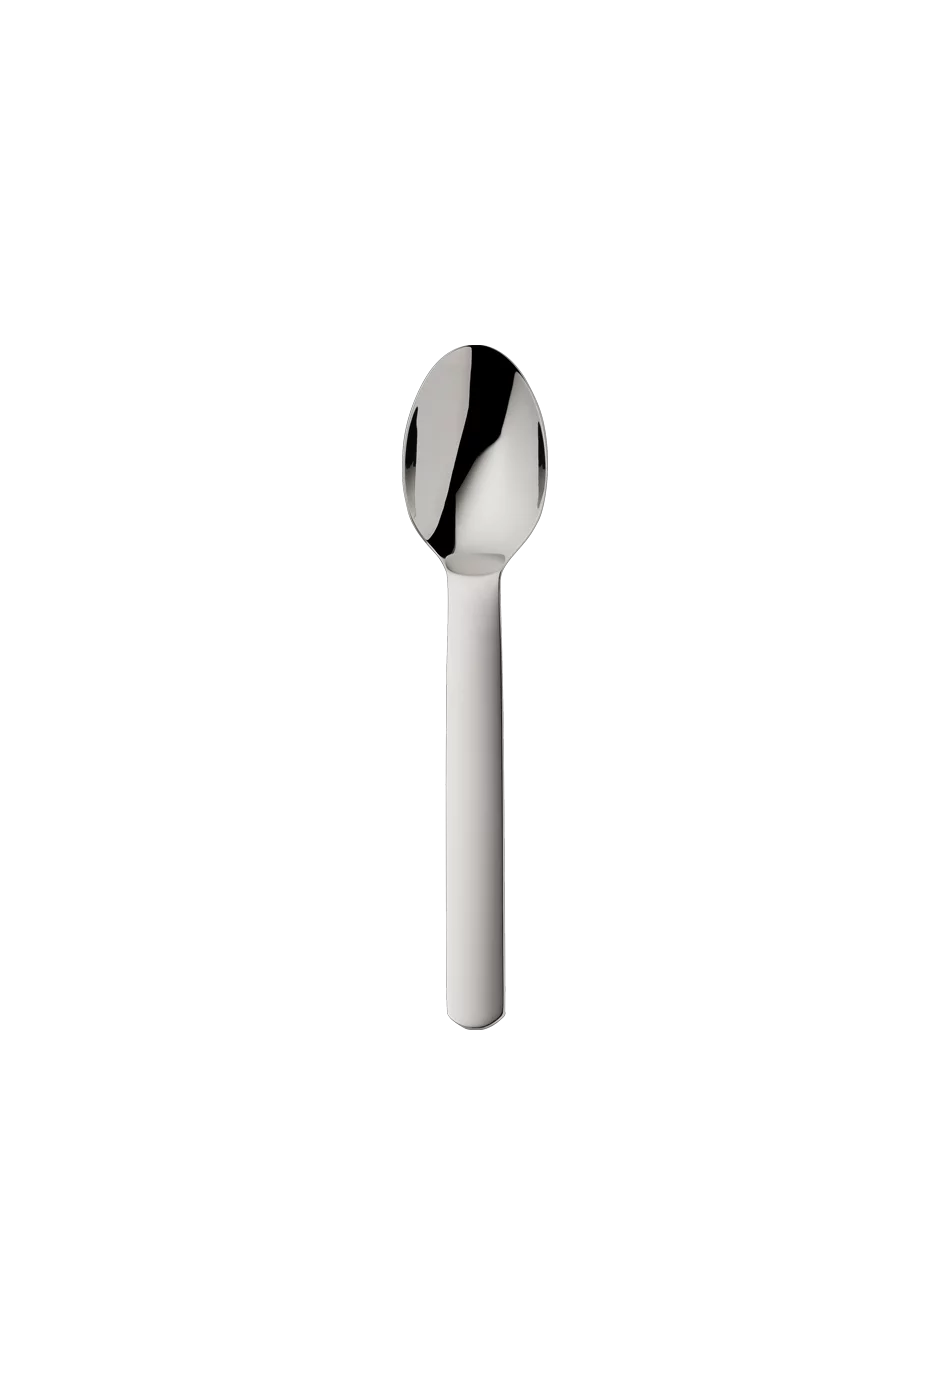 Topos Coffee Spoon 14,5 Cm (18/8 stainless steel)